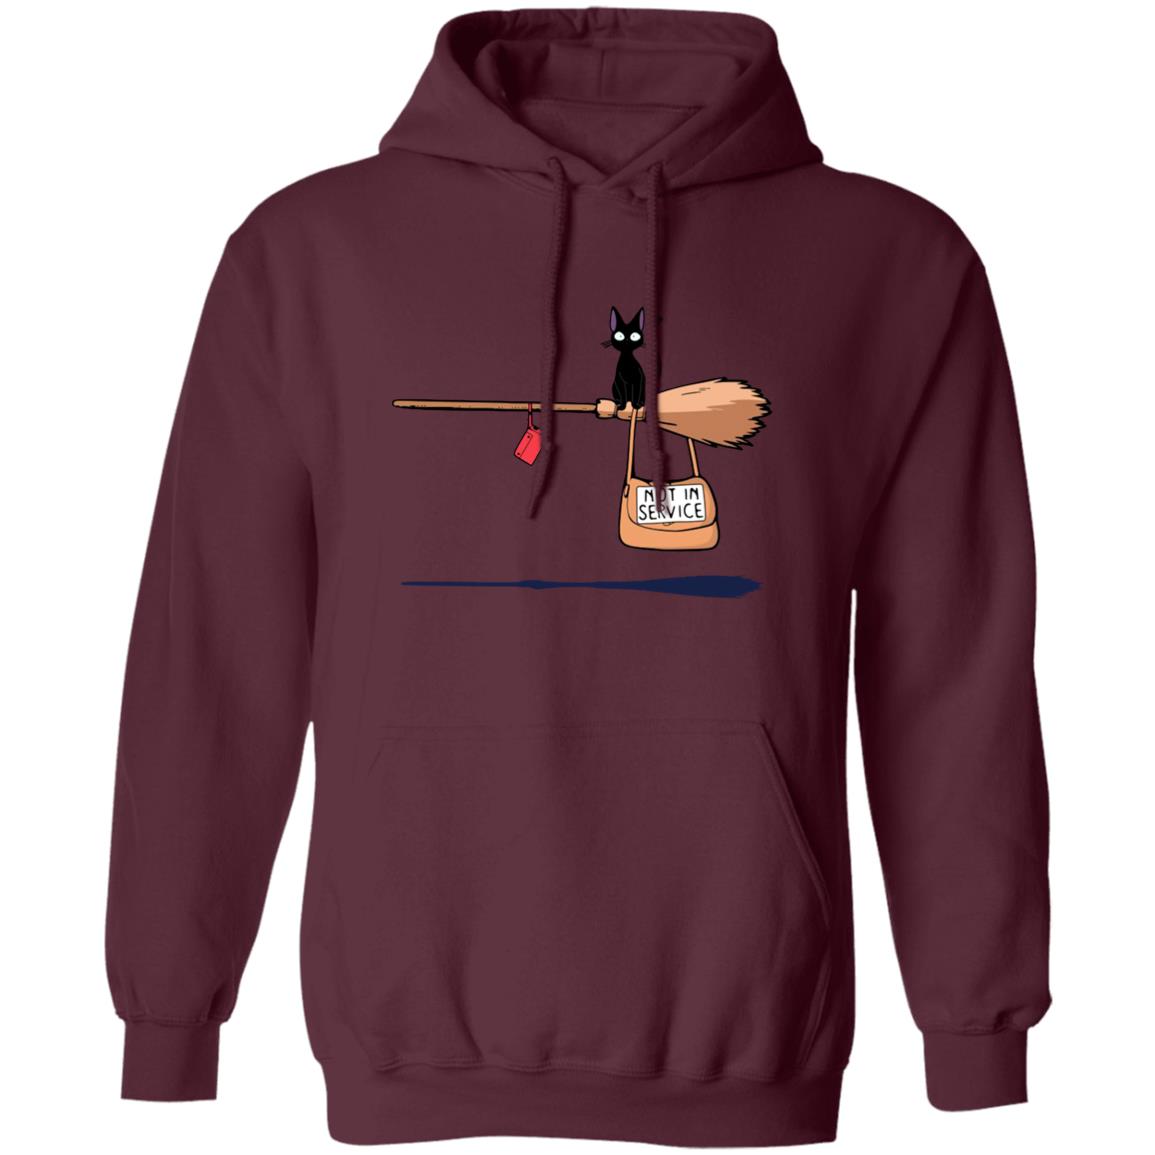 Kiki’s Delivery Service – Not in Service Hoodie